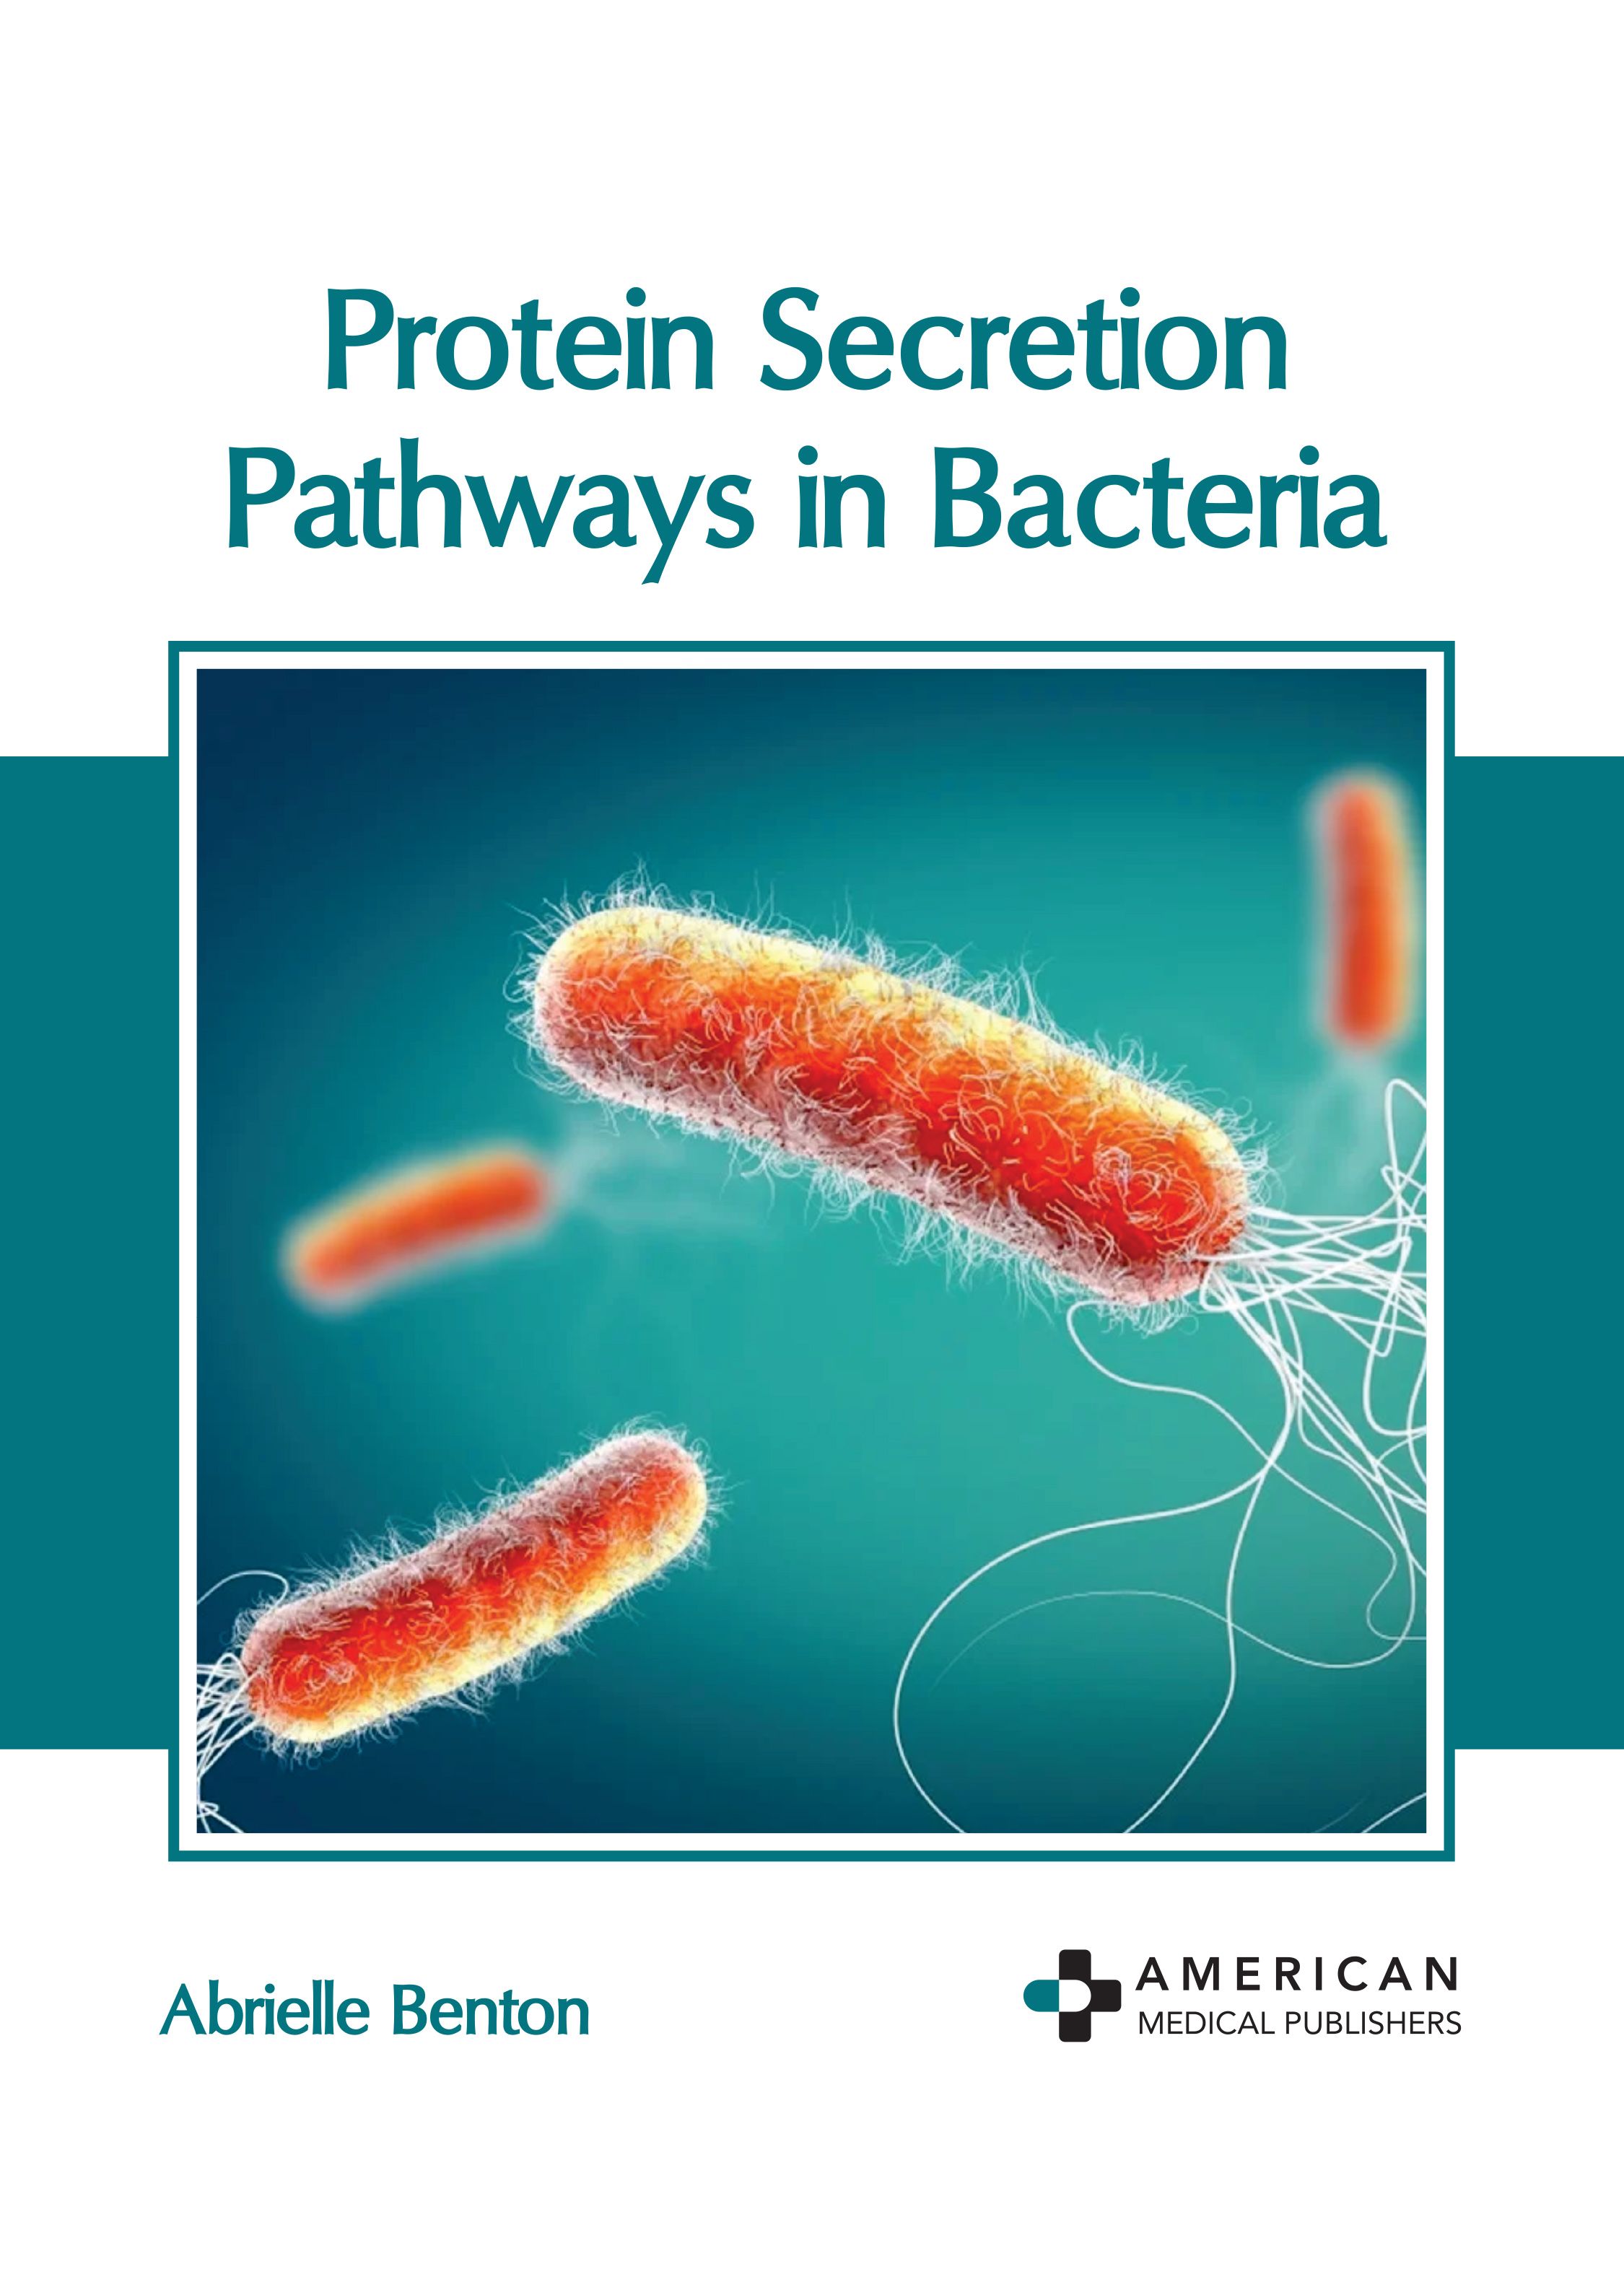 

exclusive-publishers/american-medical-publishers/protein-secretion-pathways-in-bacteria-9798887404004